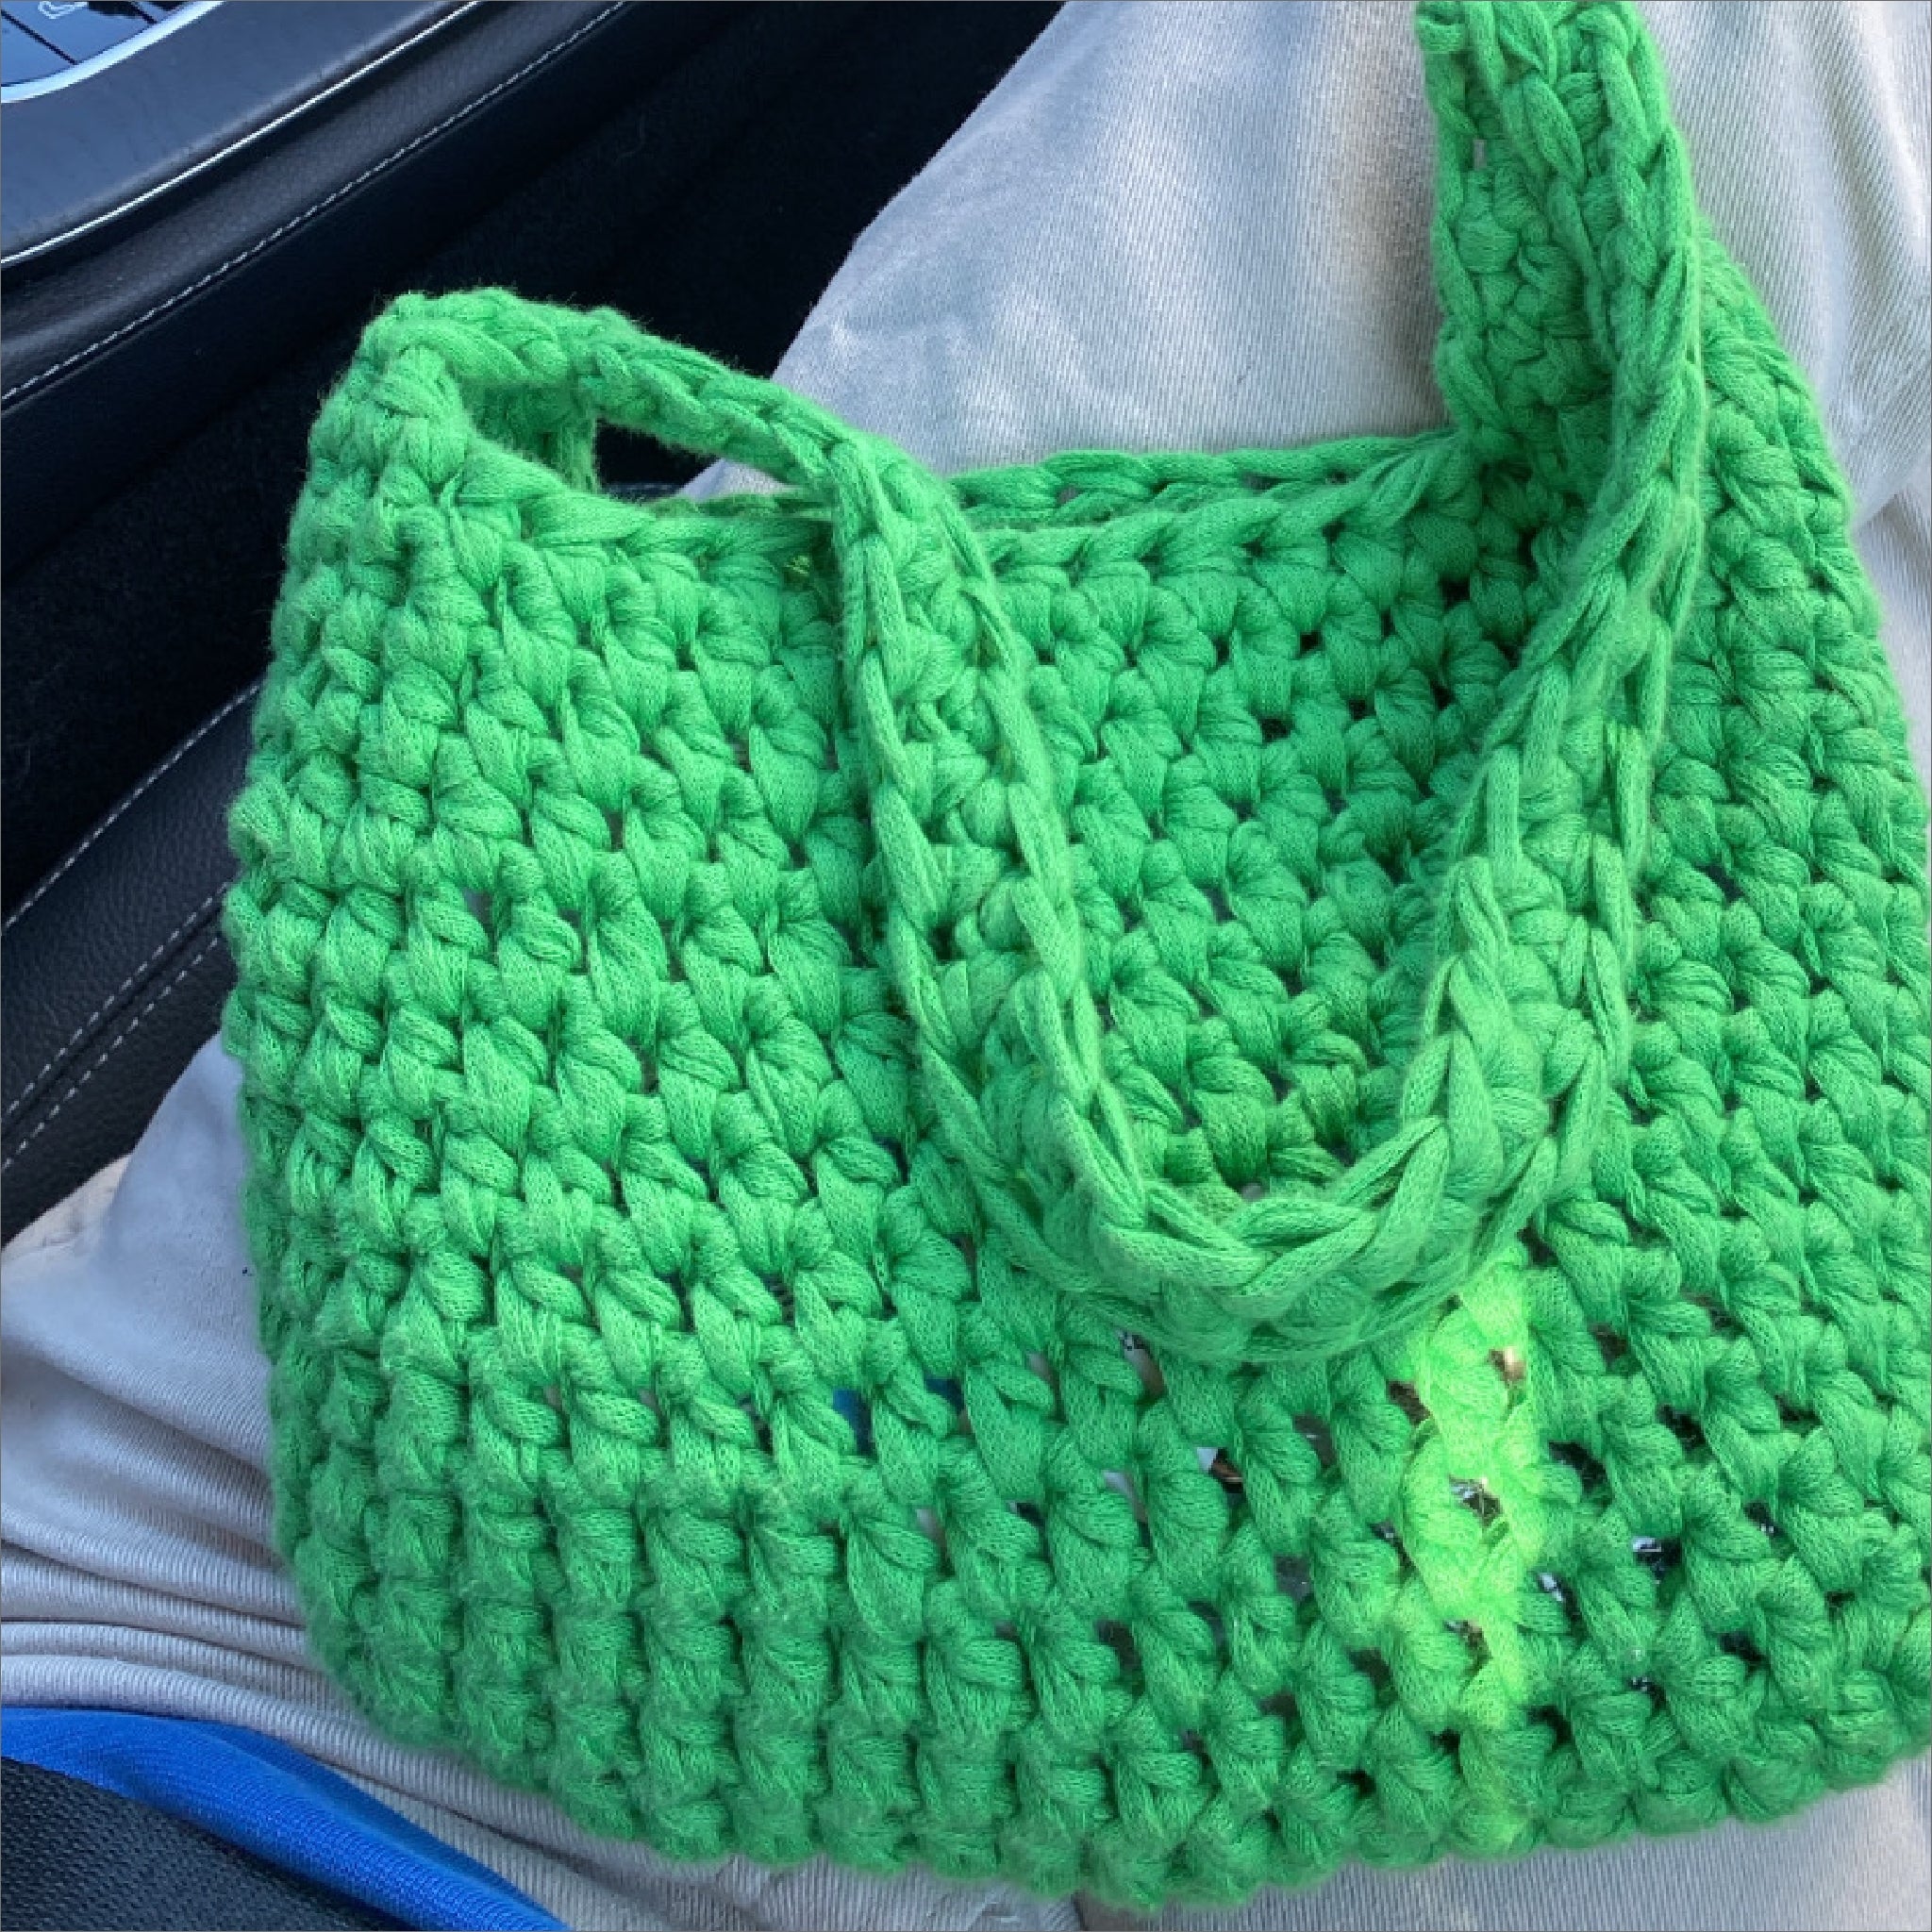 Crochet Lunch Bag or Kids Purse - free pattern and detailed tutorial